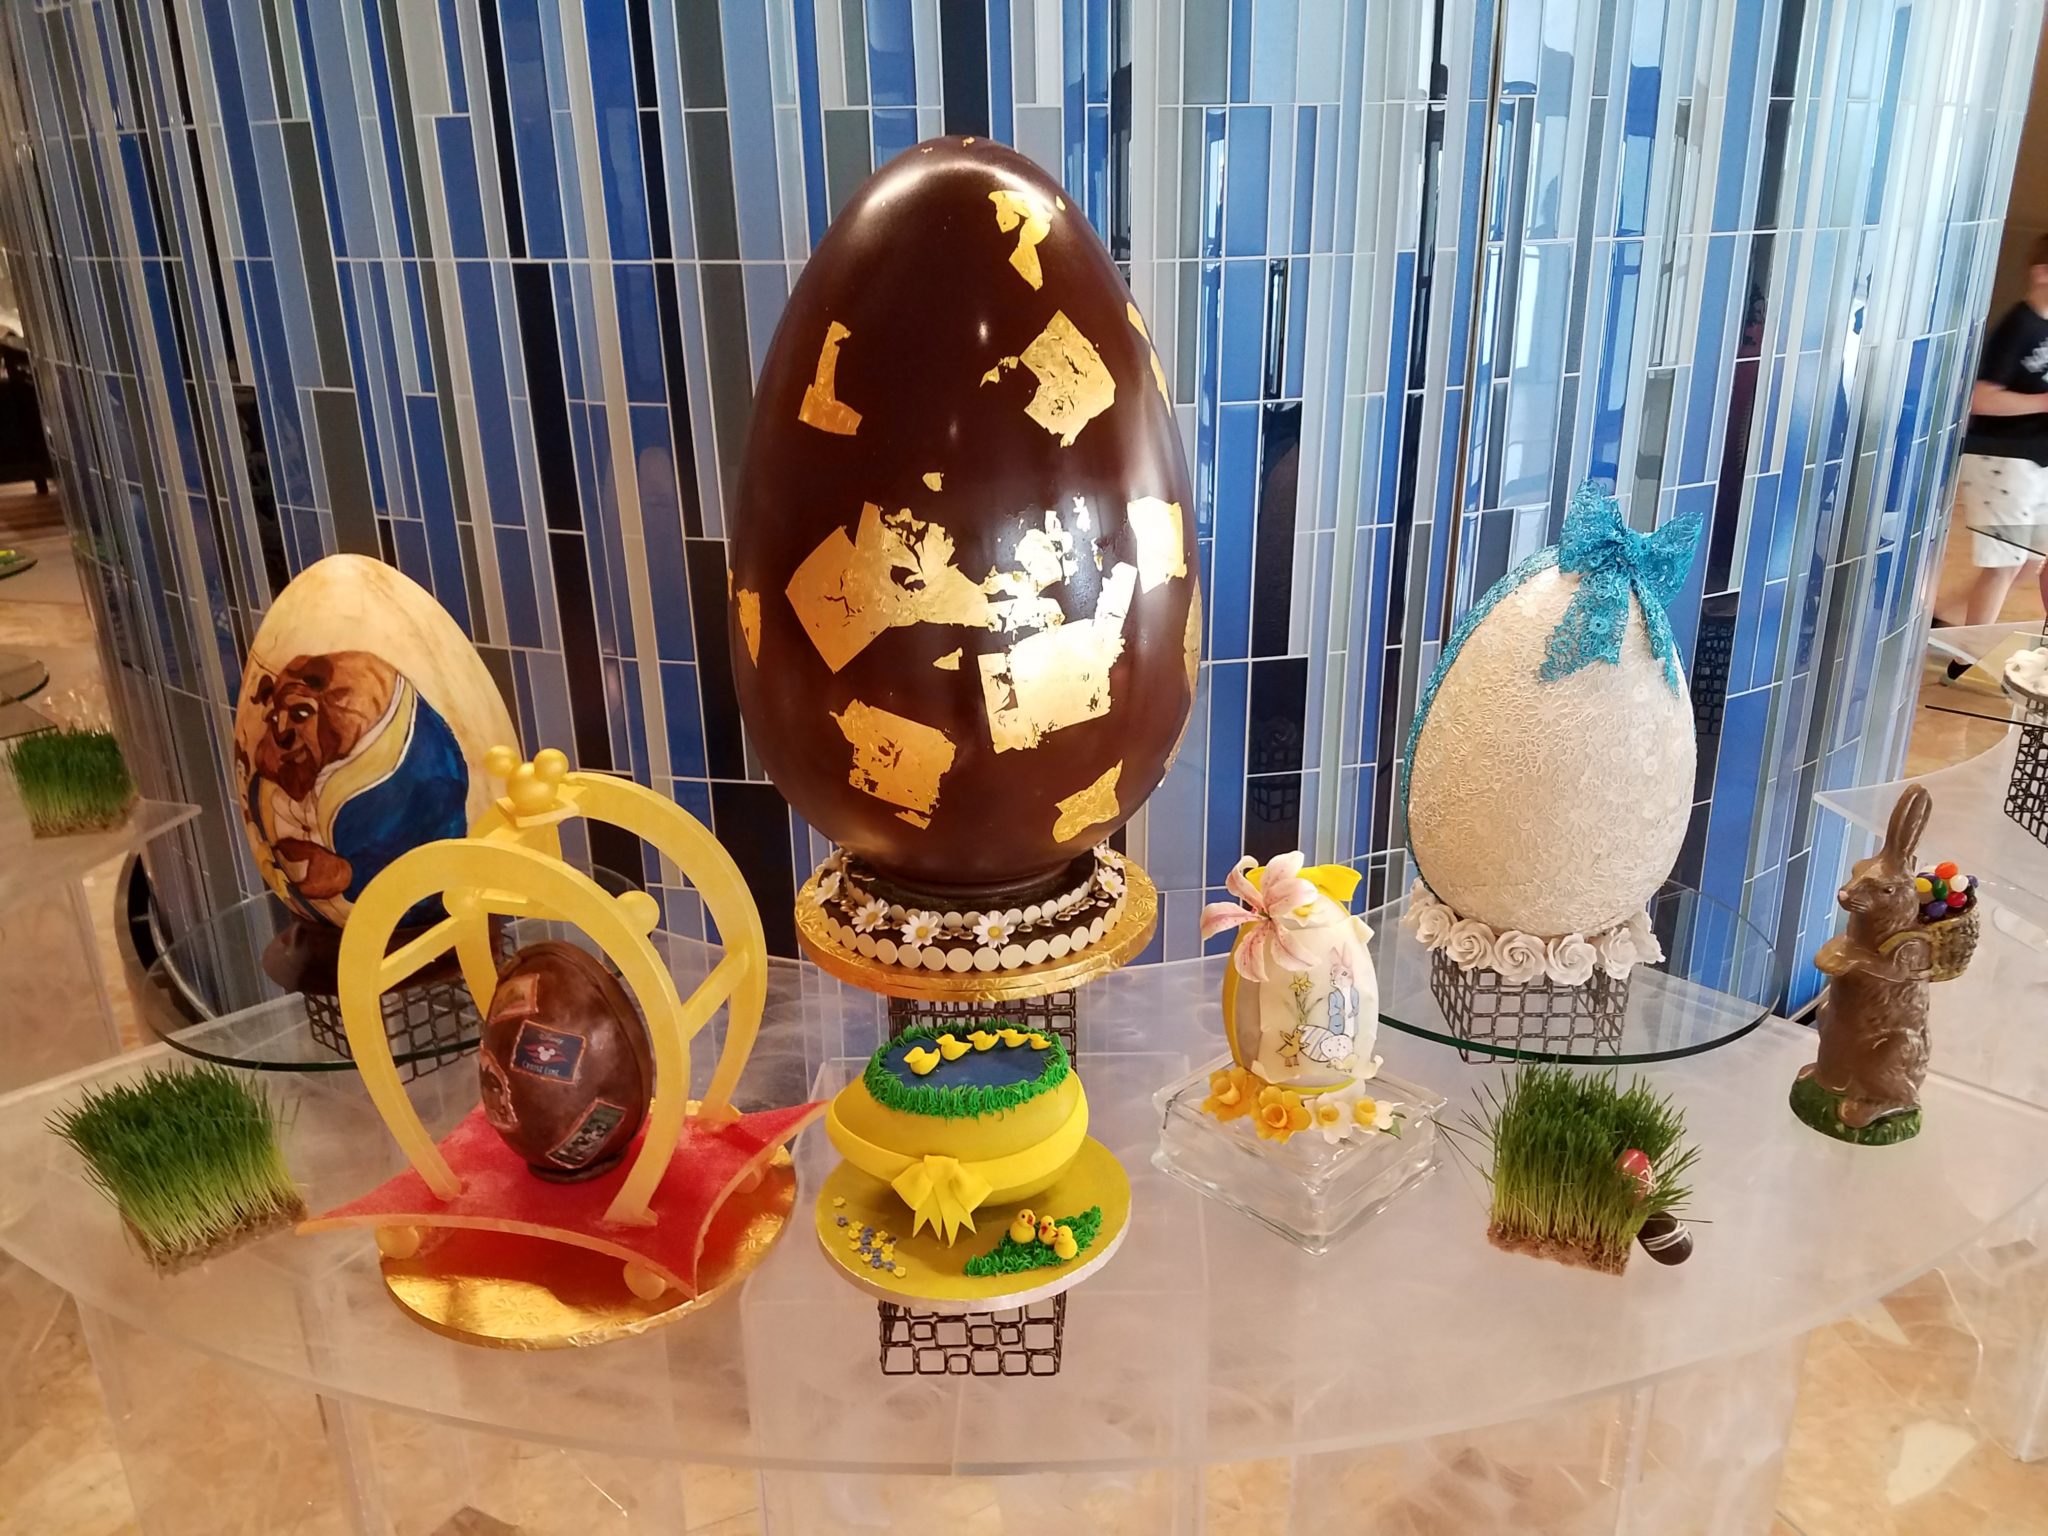 The Contemporary’s 2017 Easter Egg Display Now Available For Viewing